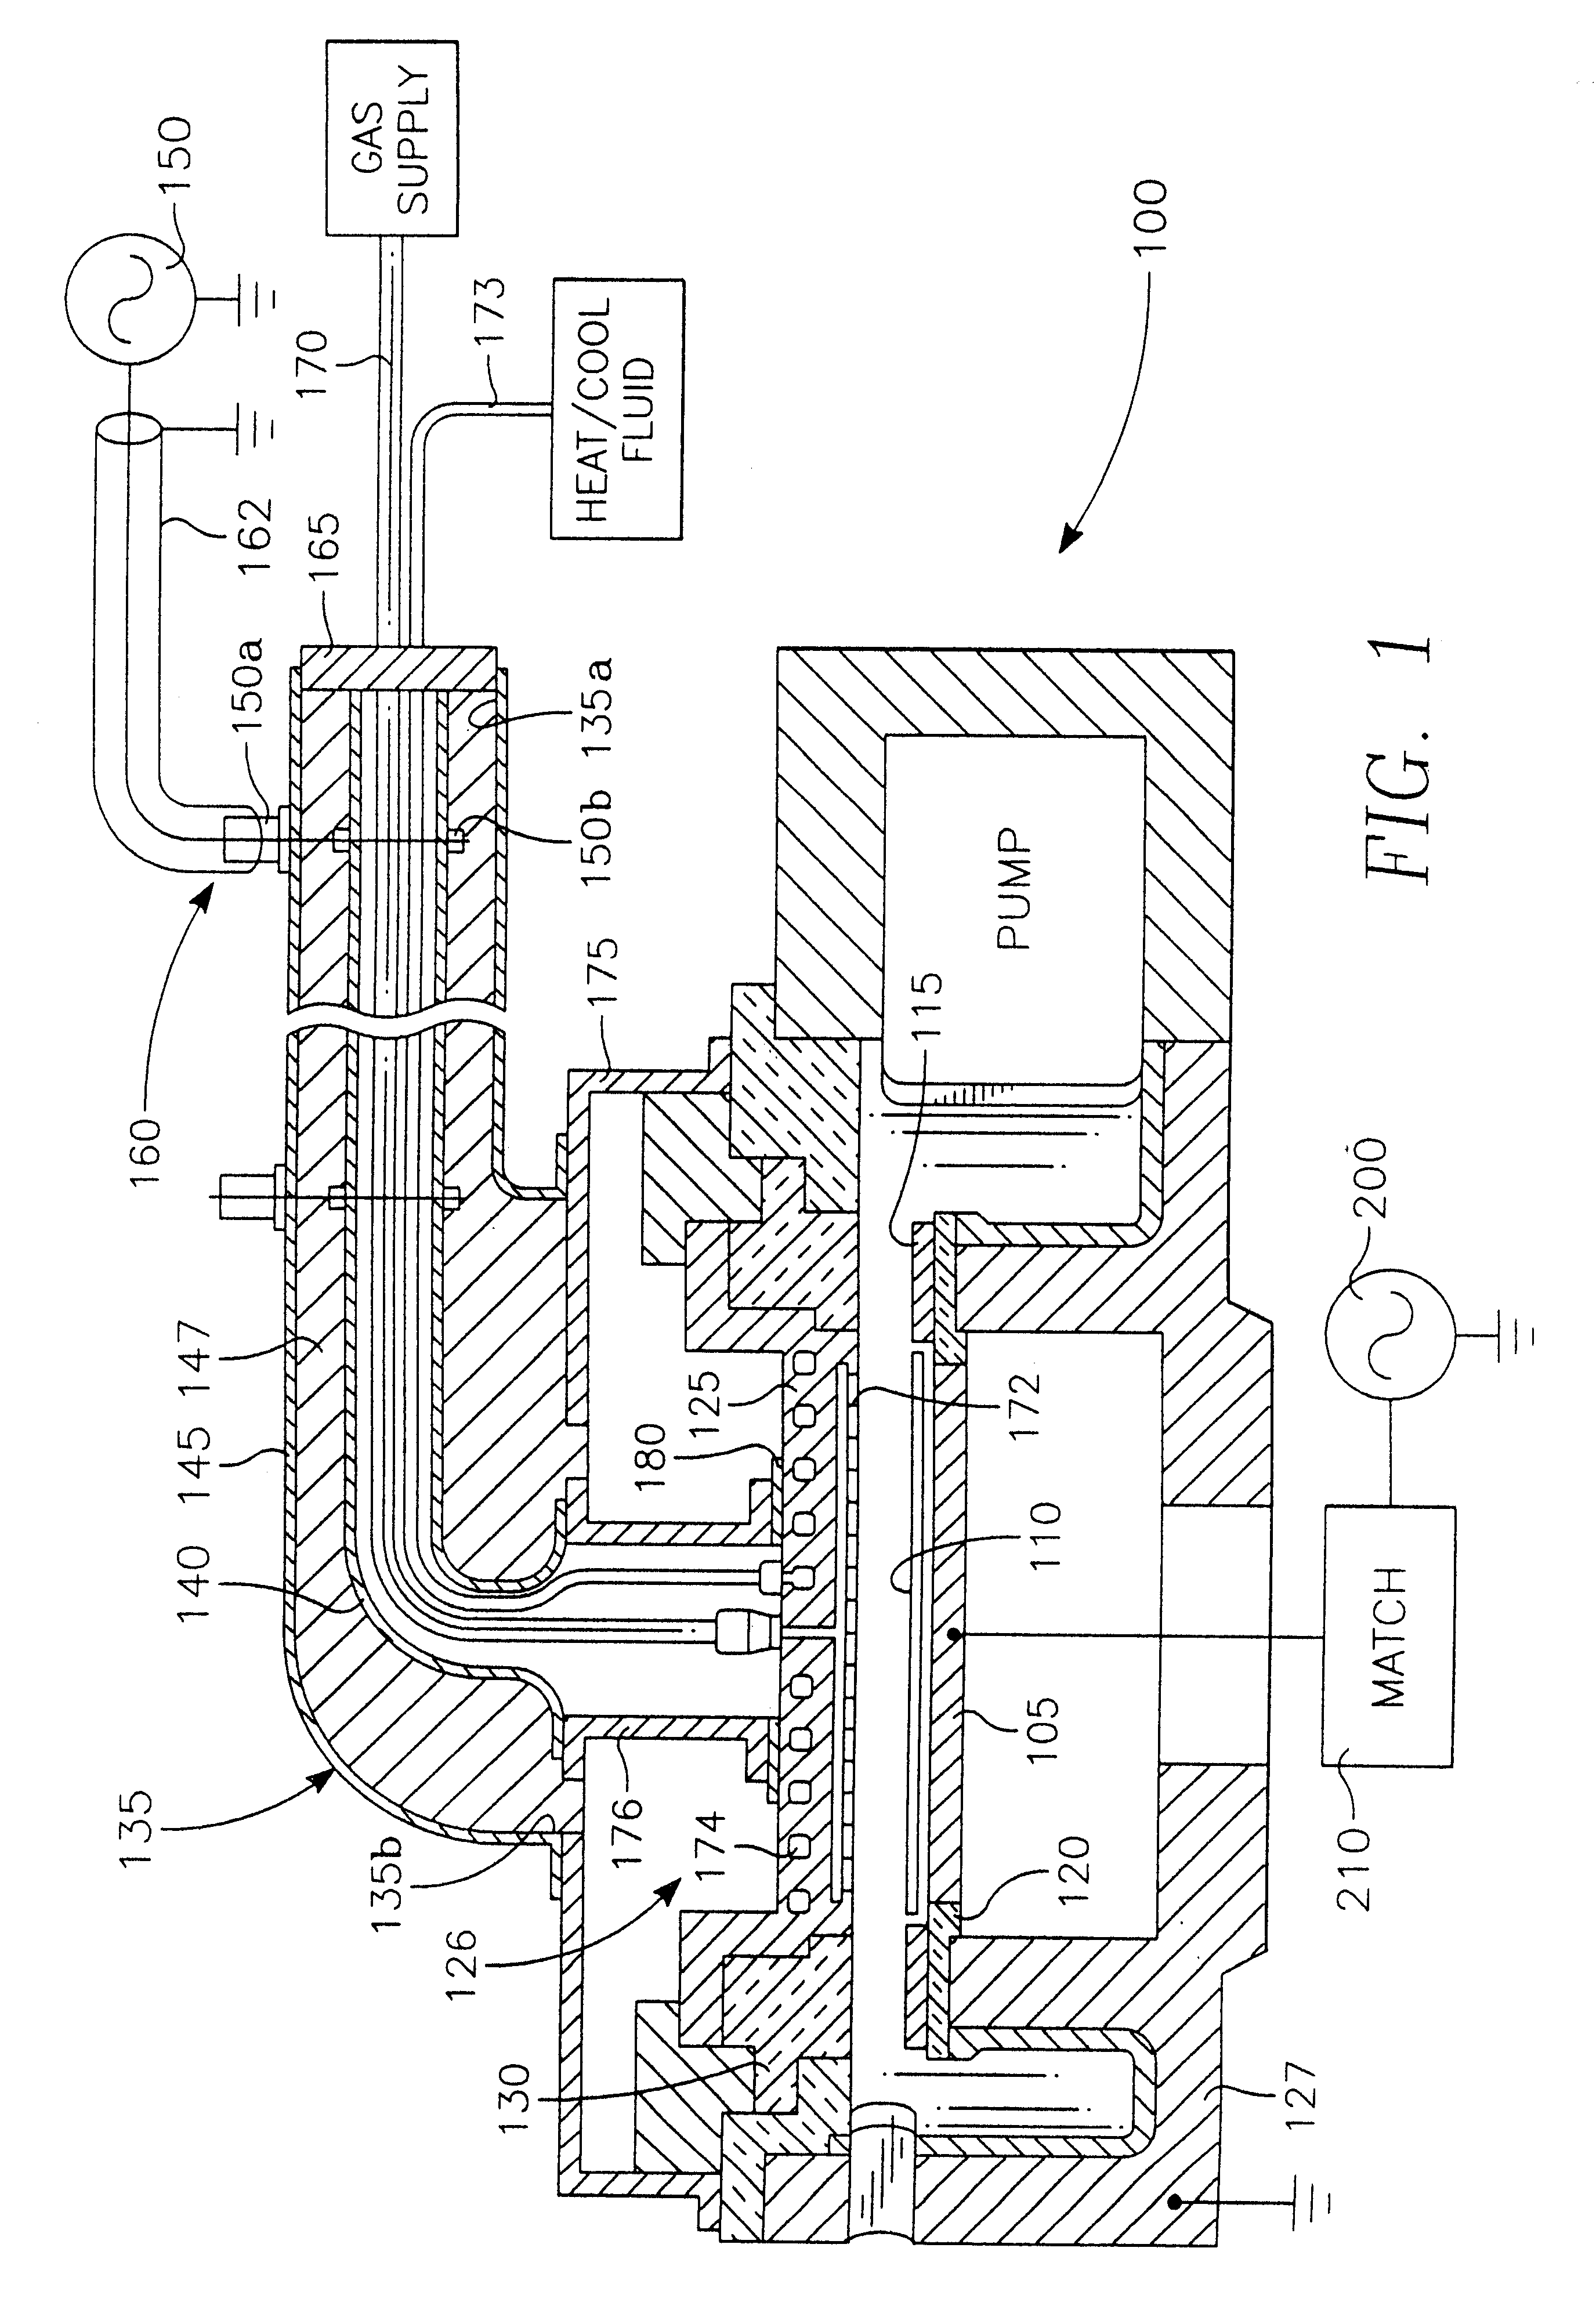 Plasma reactor with overhead RF electrode tuned to the plasma